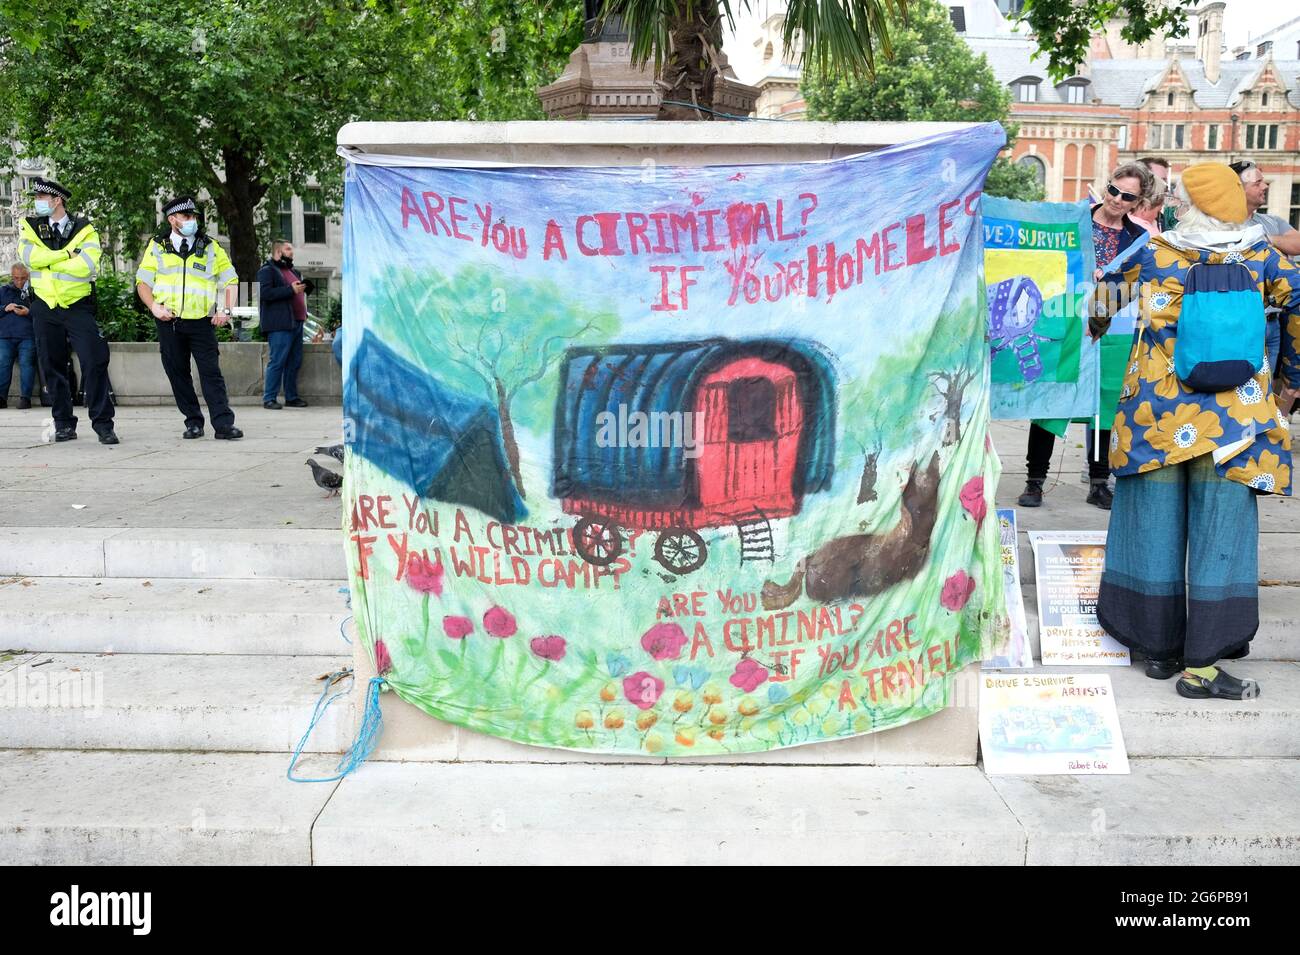 Artwork seen at a demonstration held in solidarity with Gypsy, Roma, Travellers and the homeless at risk of being criminalised through the PCSC Bill Stock Photo